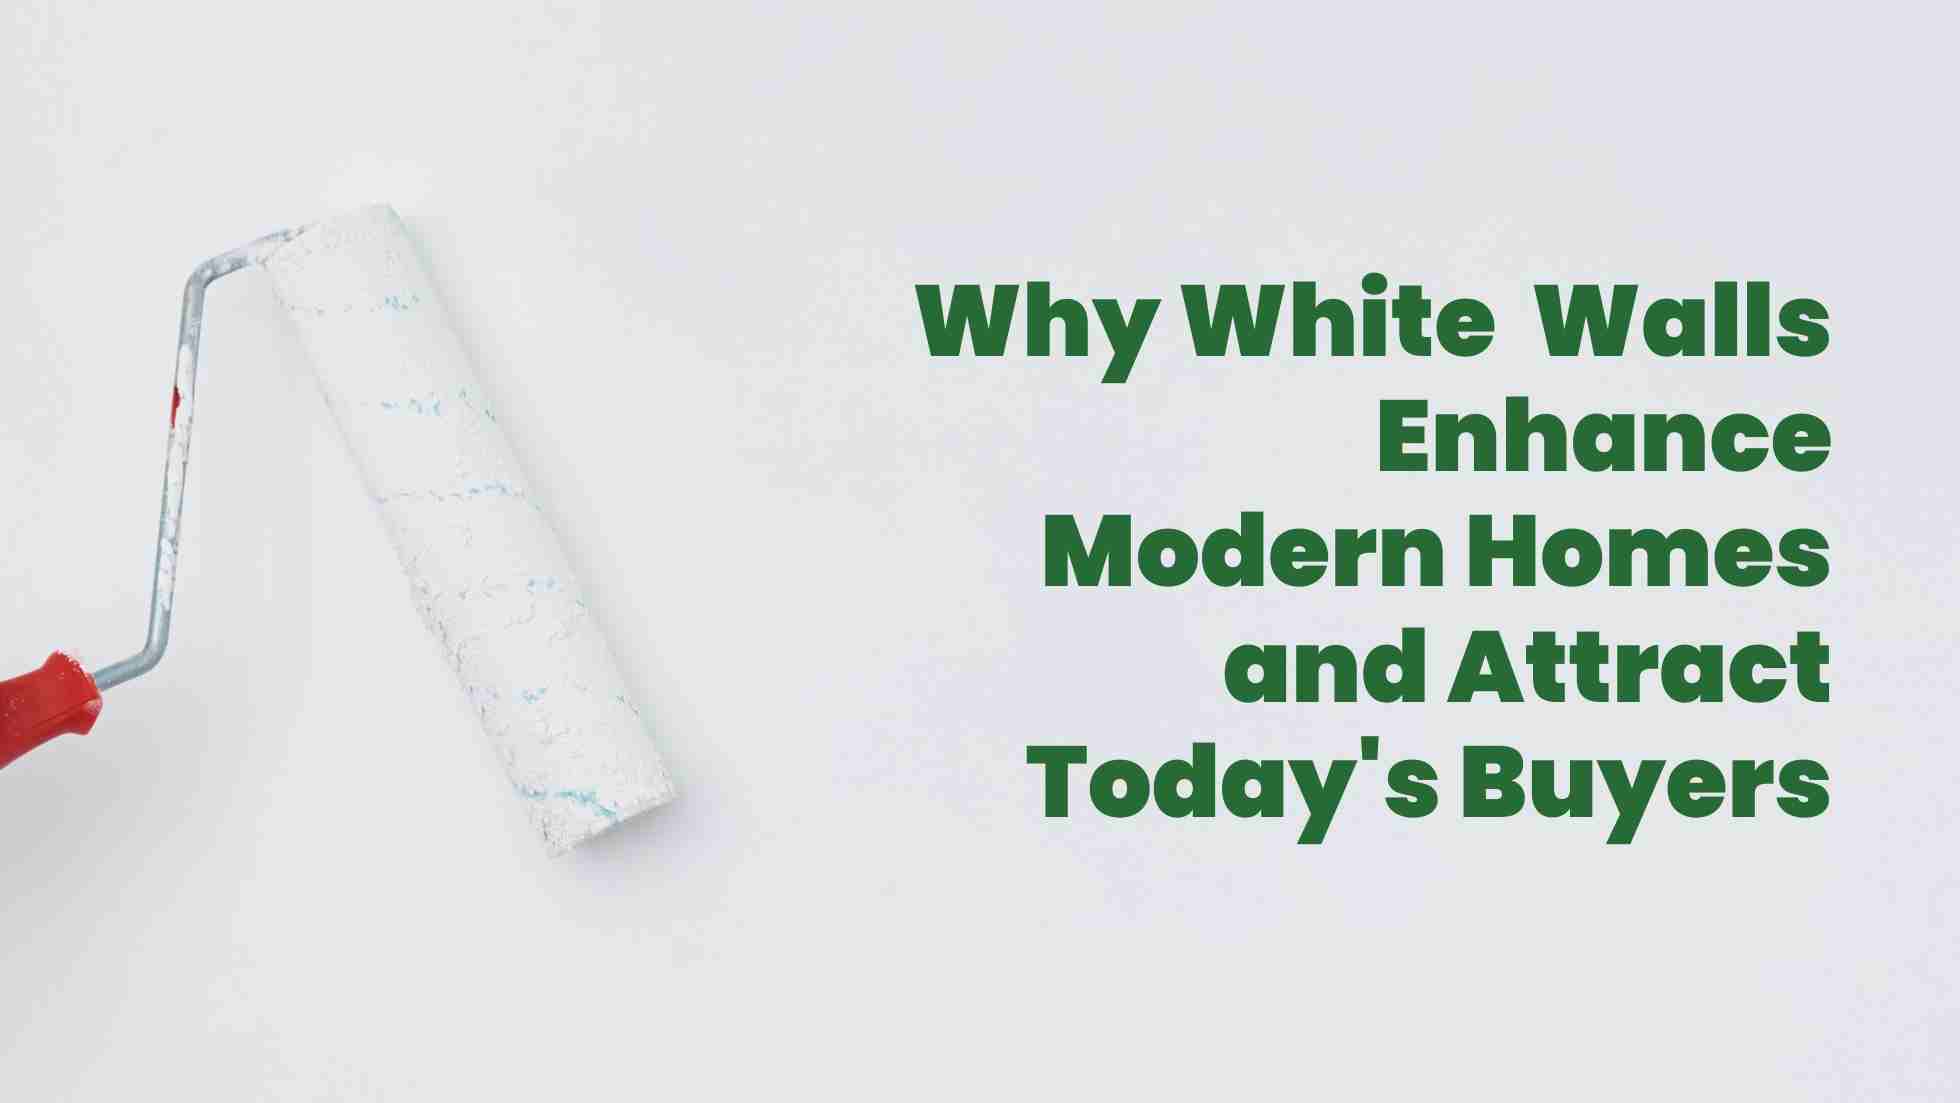 You are currently viewing Why White Walls Enhance Modern Homes and Attract Today’s Buyers